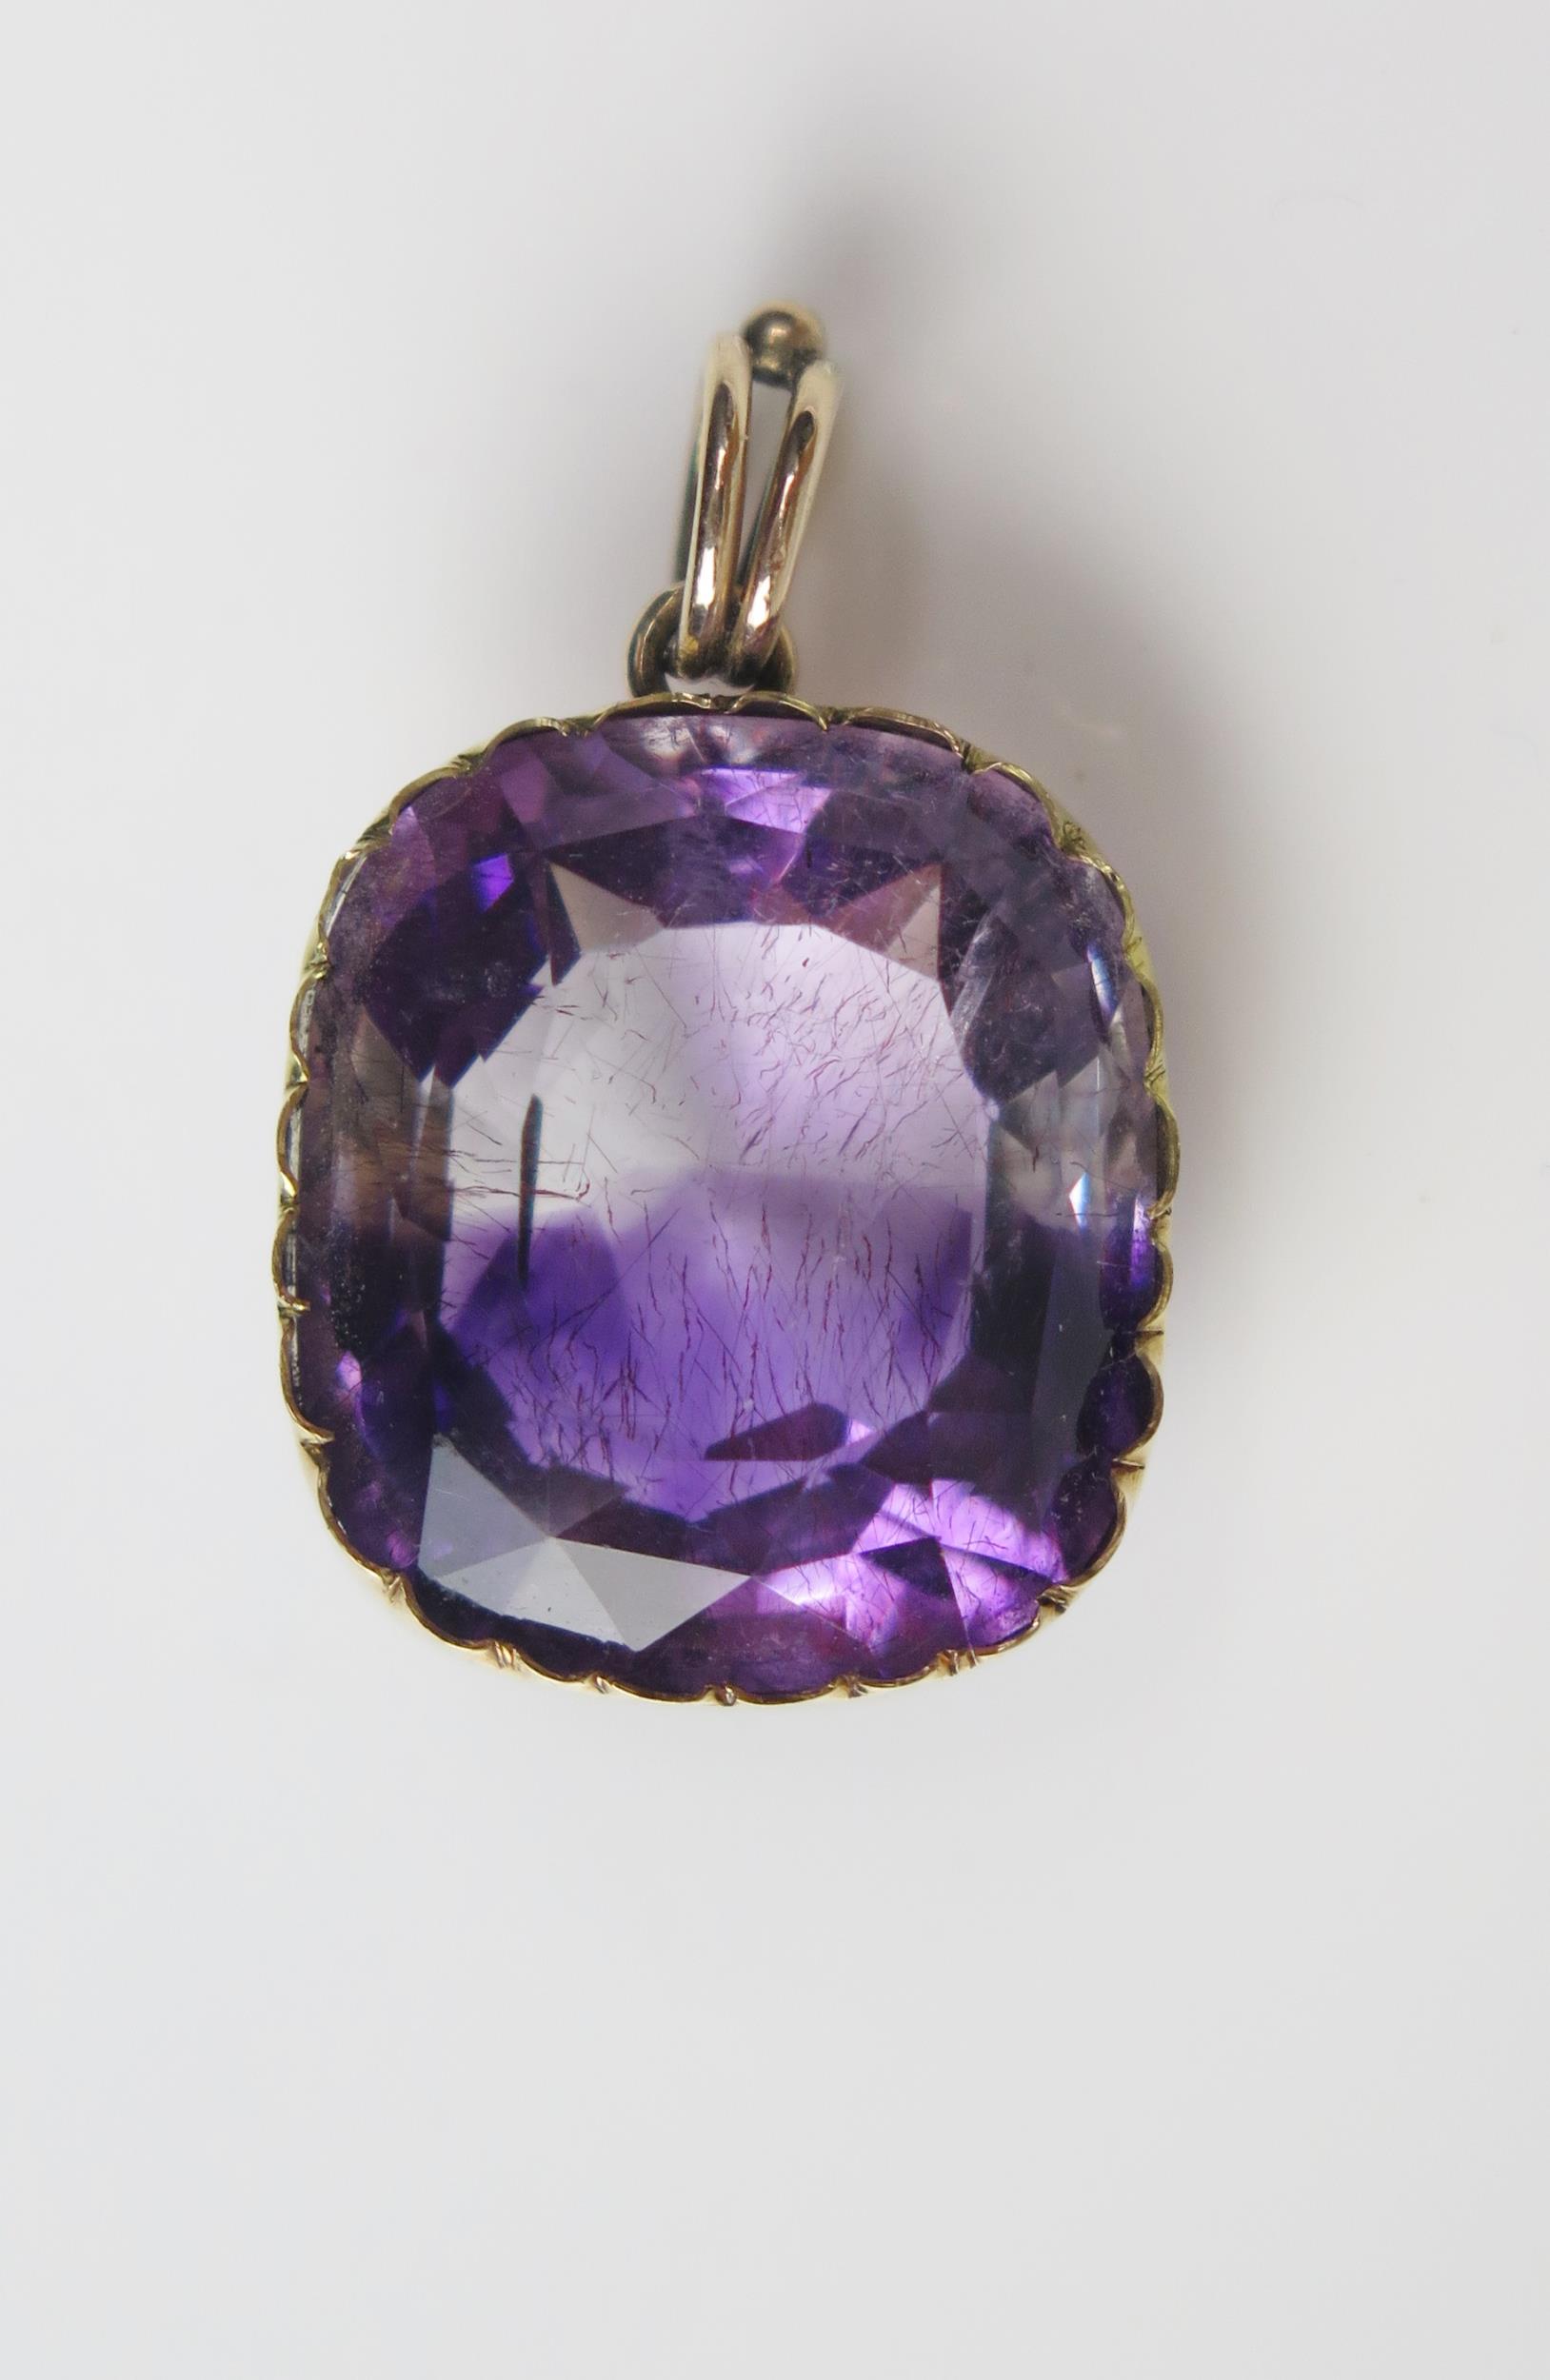 An Antique Amethyst Pendant in an unmarked gold setting, the 18.5x16.2mm stone with clear and purple